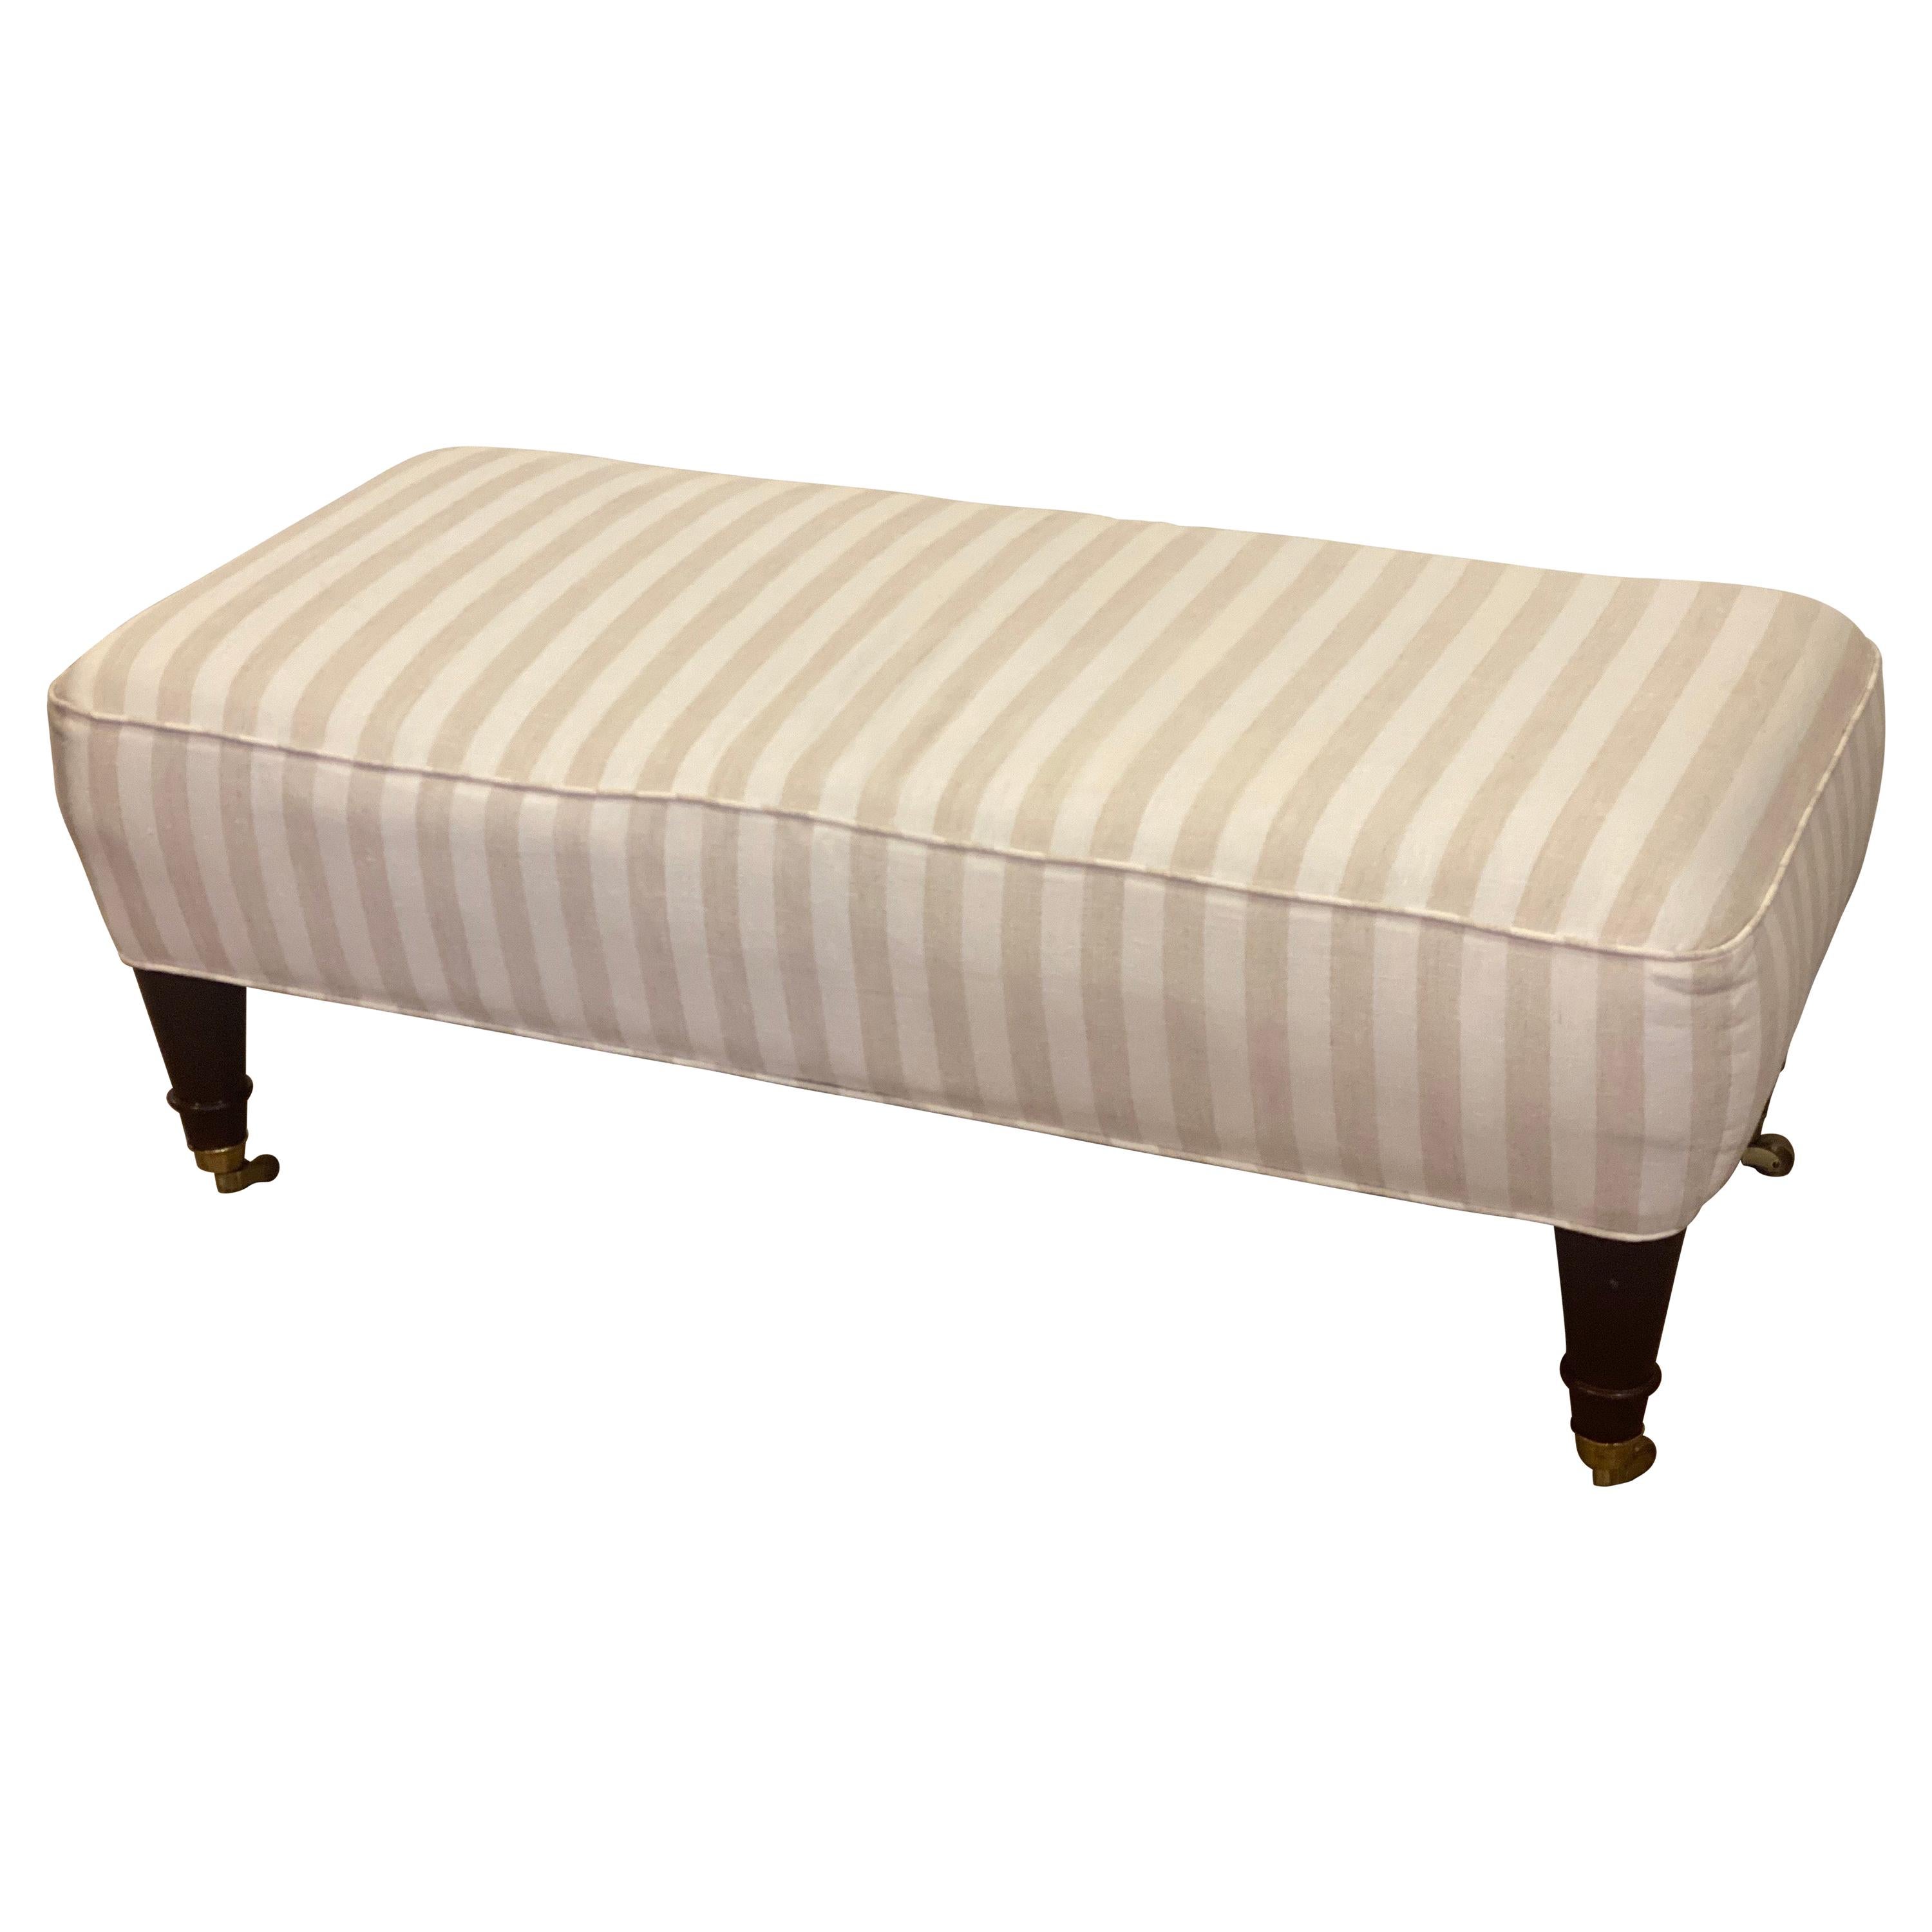 English Style Upholstered Bench